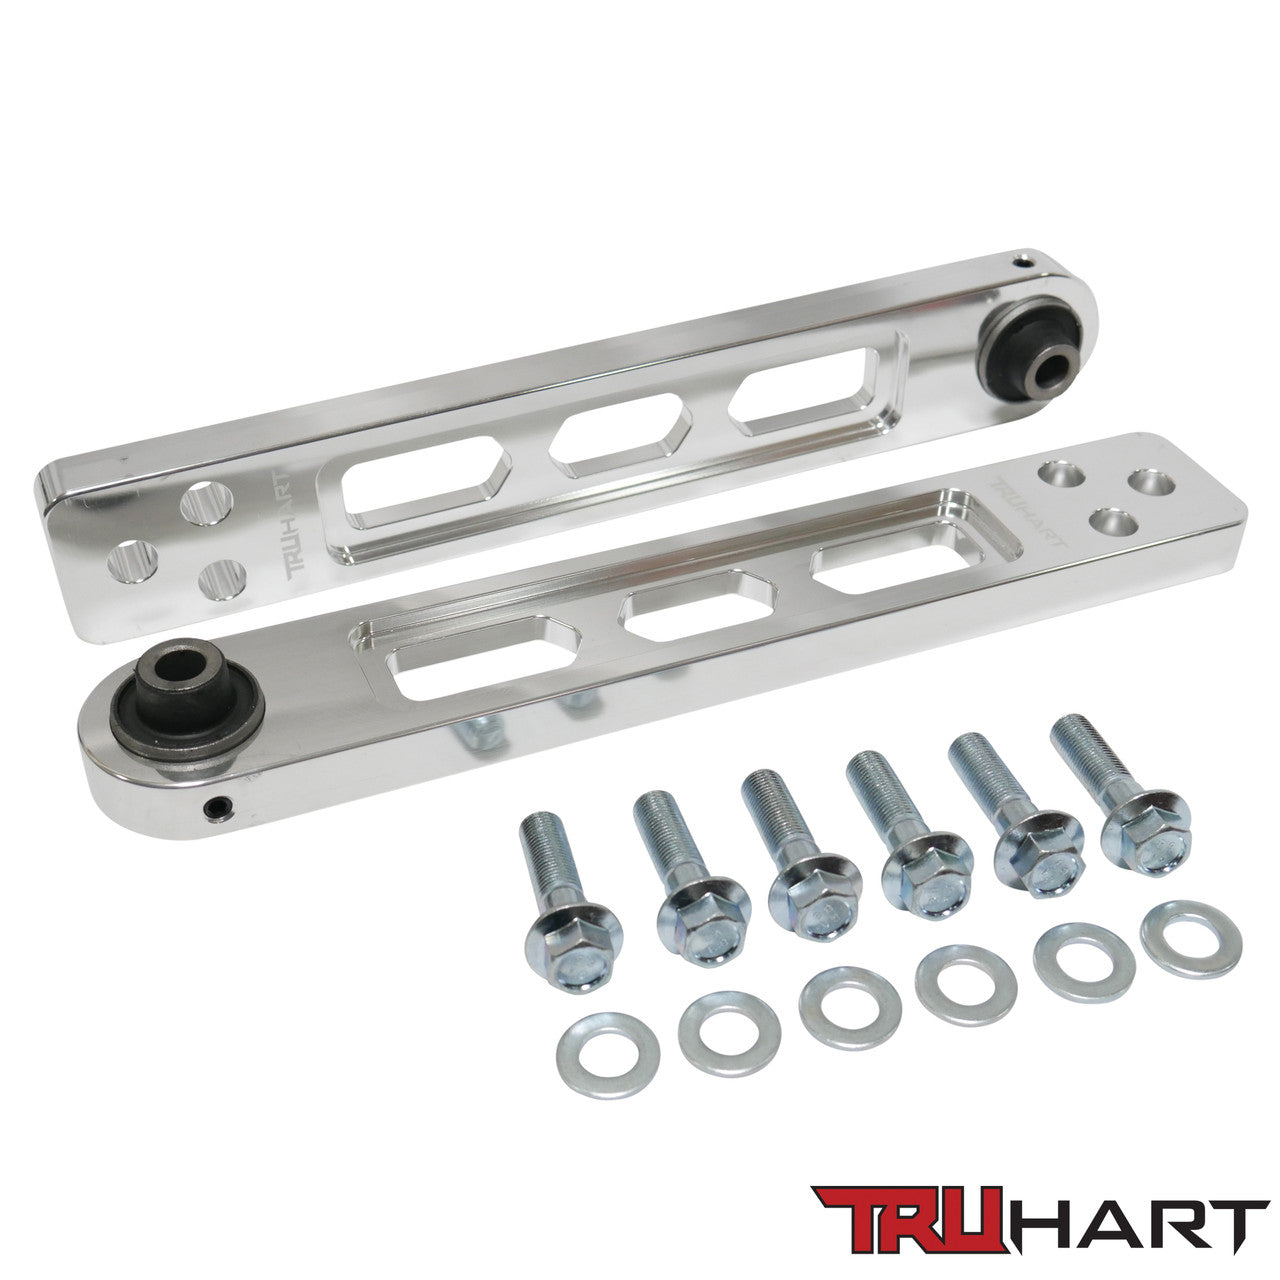 Truhart Rear Lower Control Arms - TH-H103-1-PO Polished - for Honda Civic 2001-2005